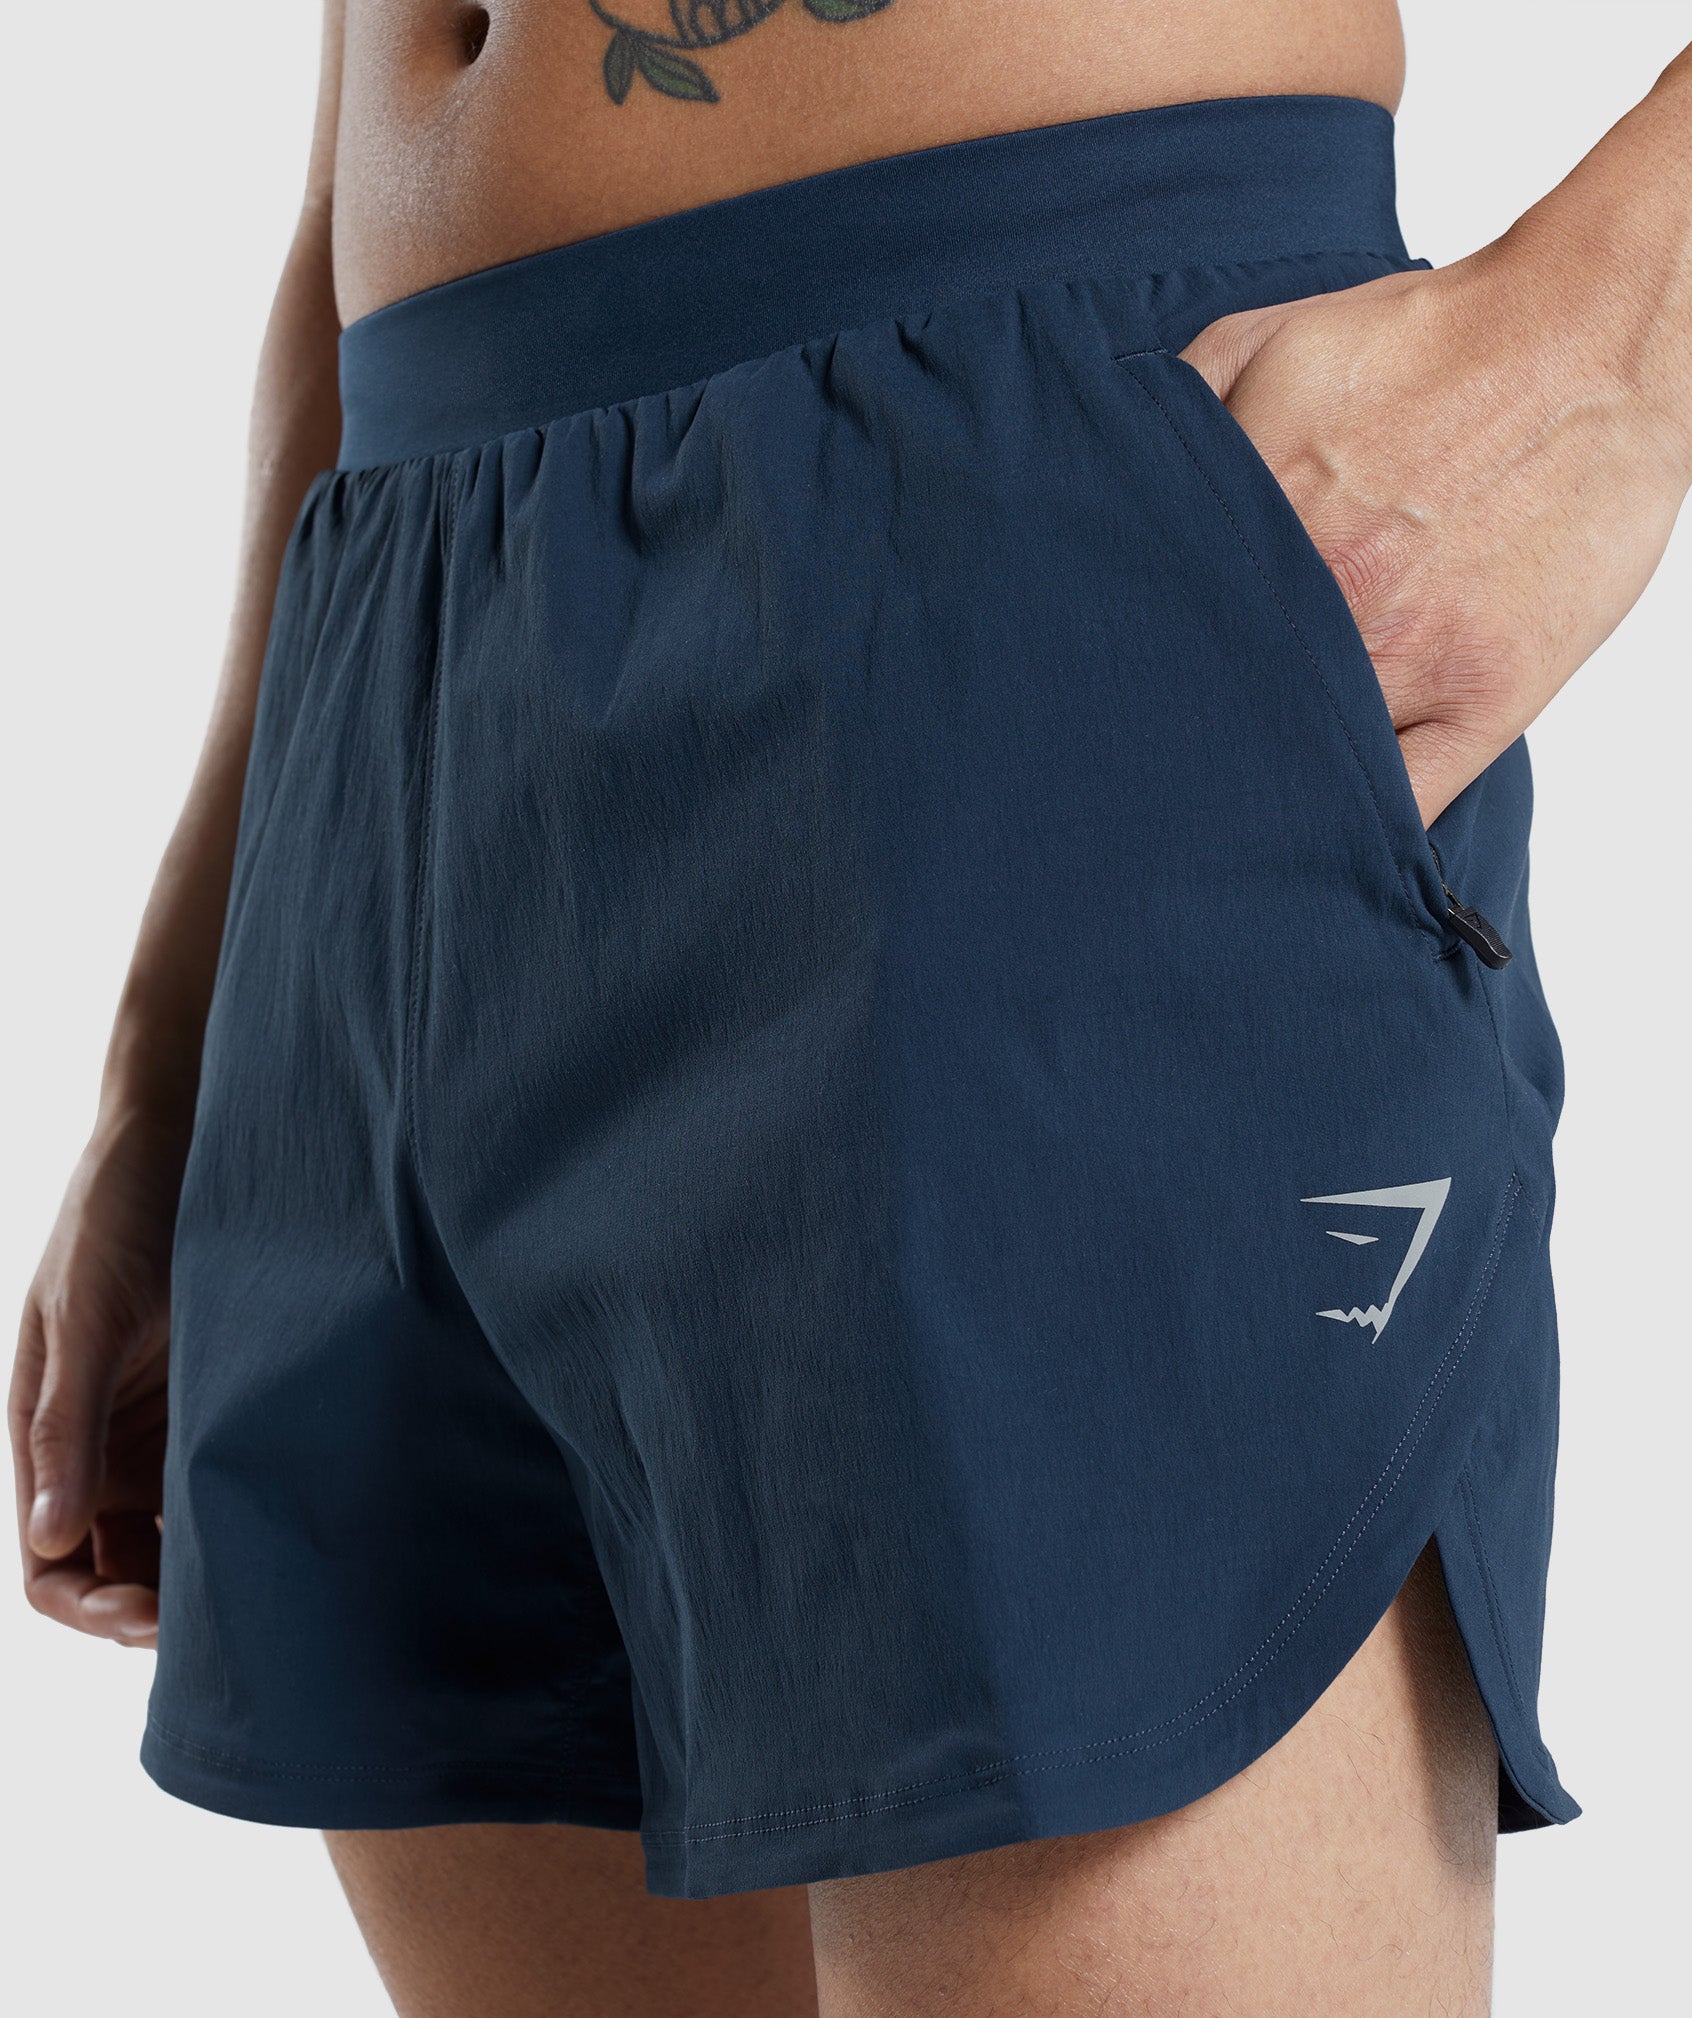 Speed Evolve 5" Shorts in Navy - view 6